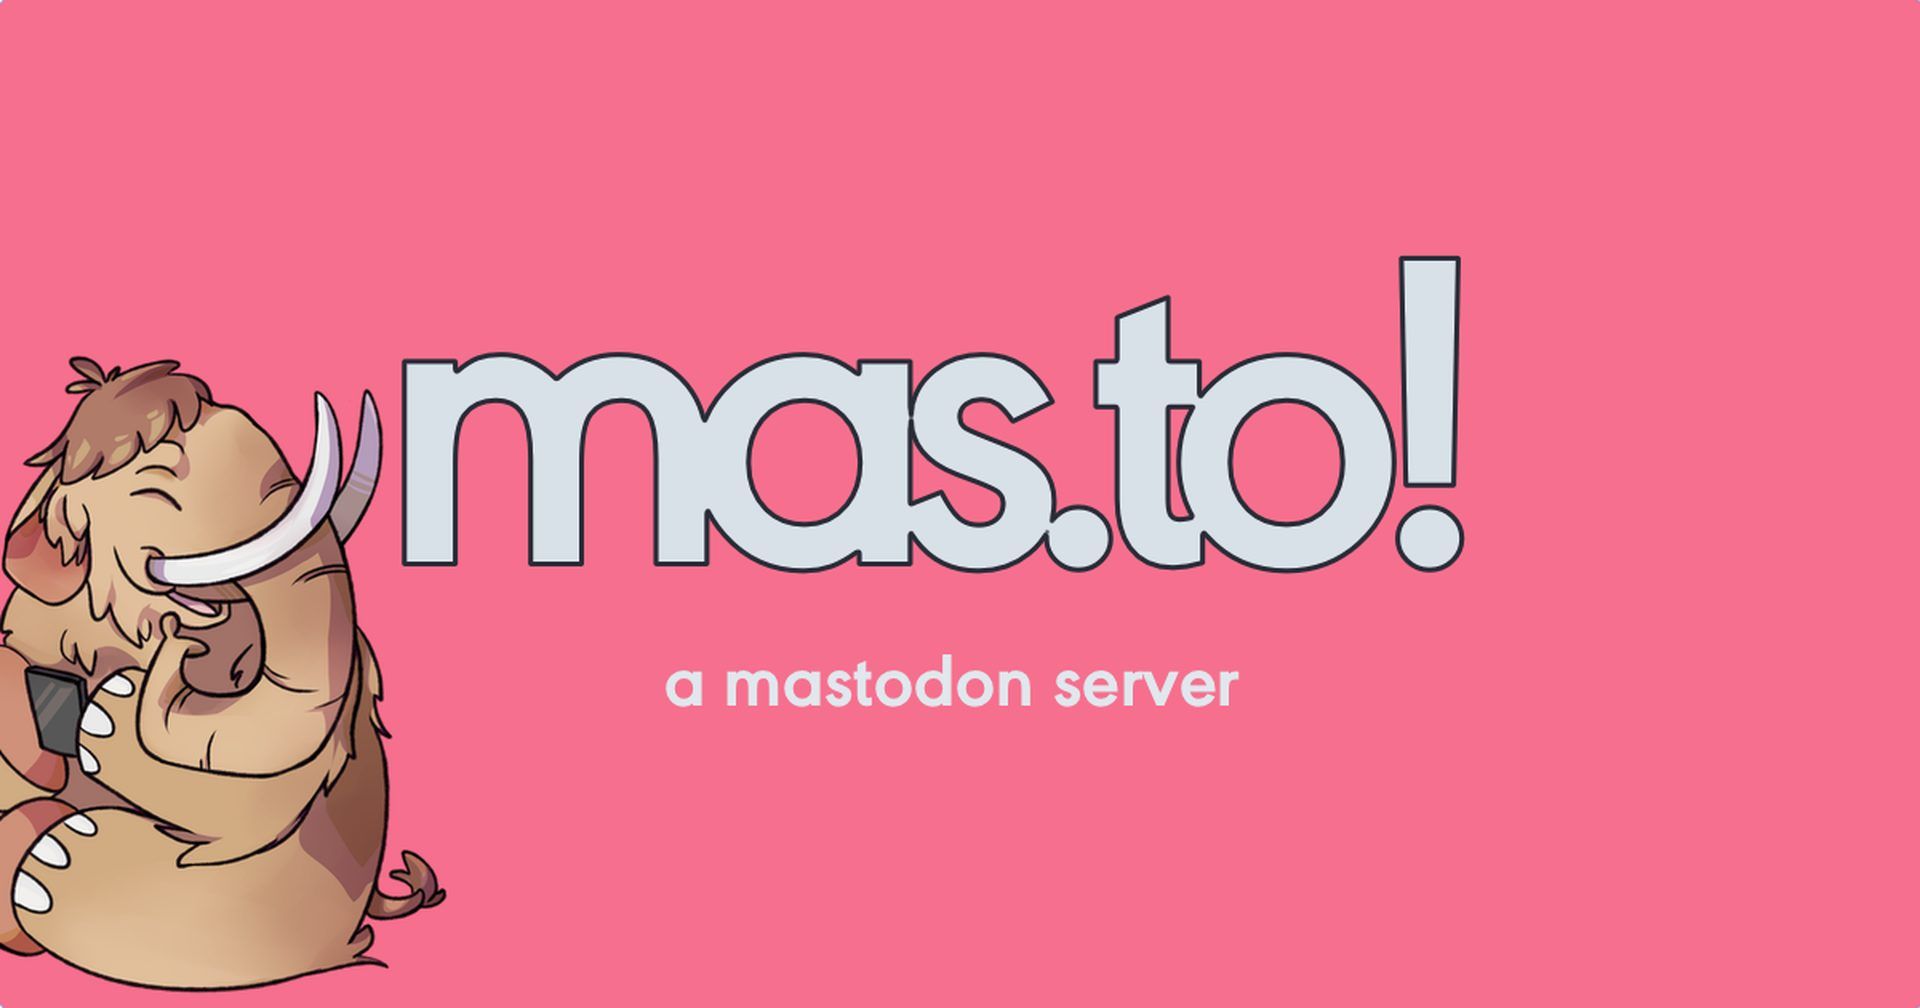 +70,000 newcomers, here is your best Mastodon servers list